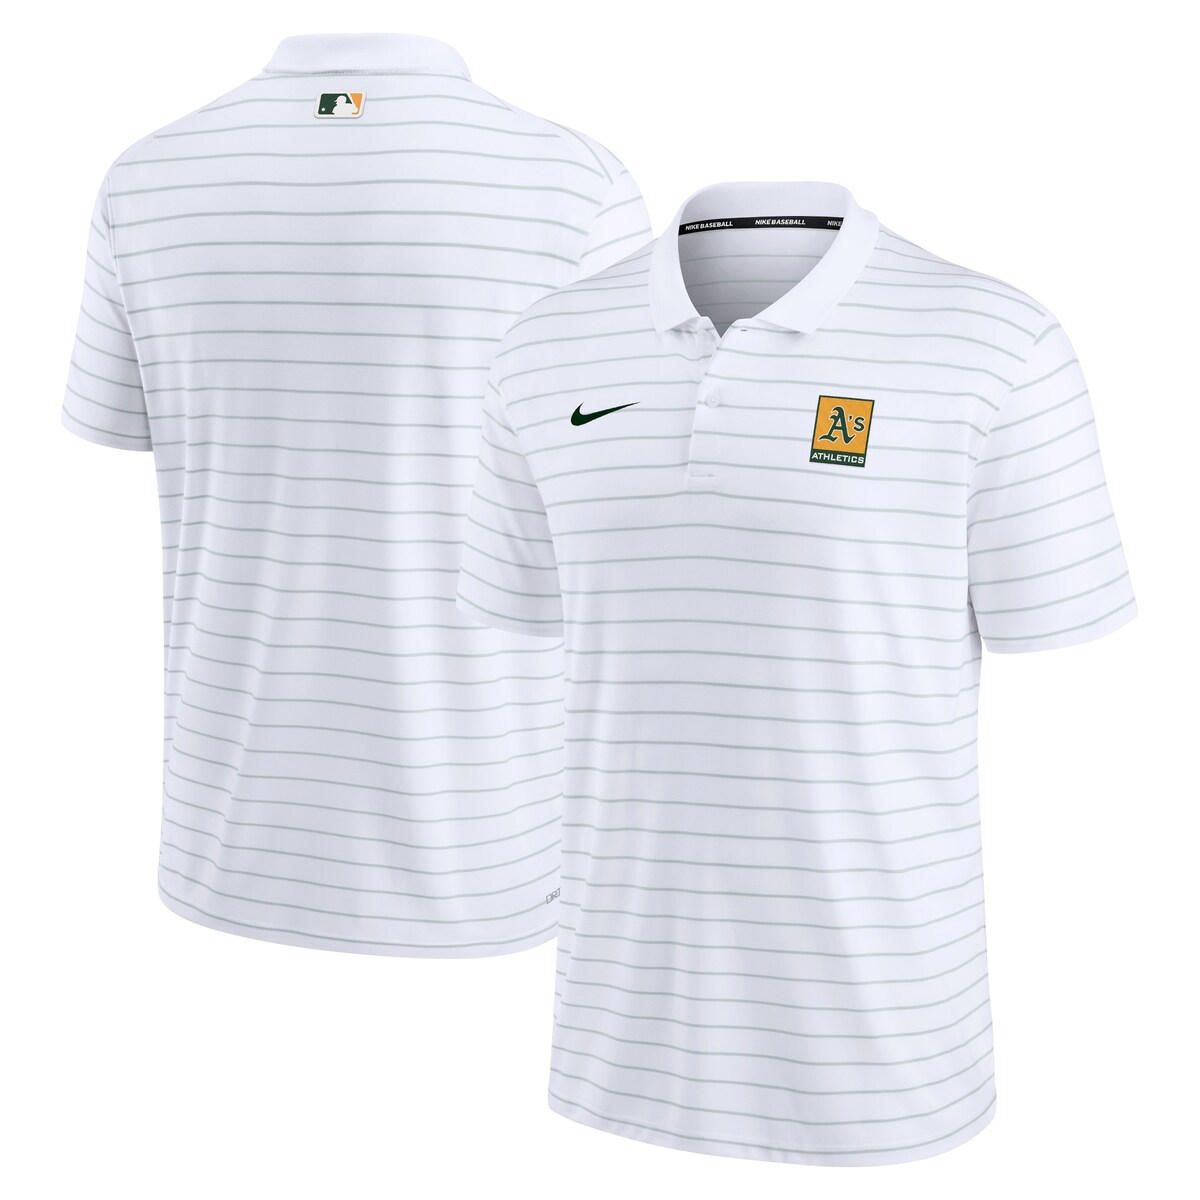 yObYzMLB AX`bNX |Vc Nike iCL Y zCg (Men's Nike Authentic Collection Short Sleeve Striped Polo)